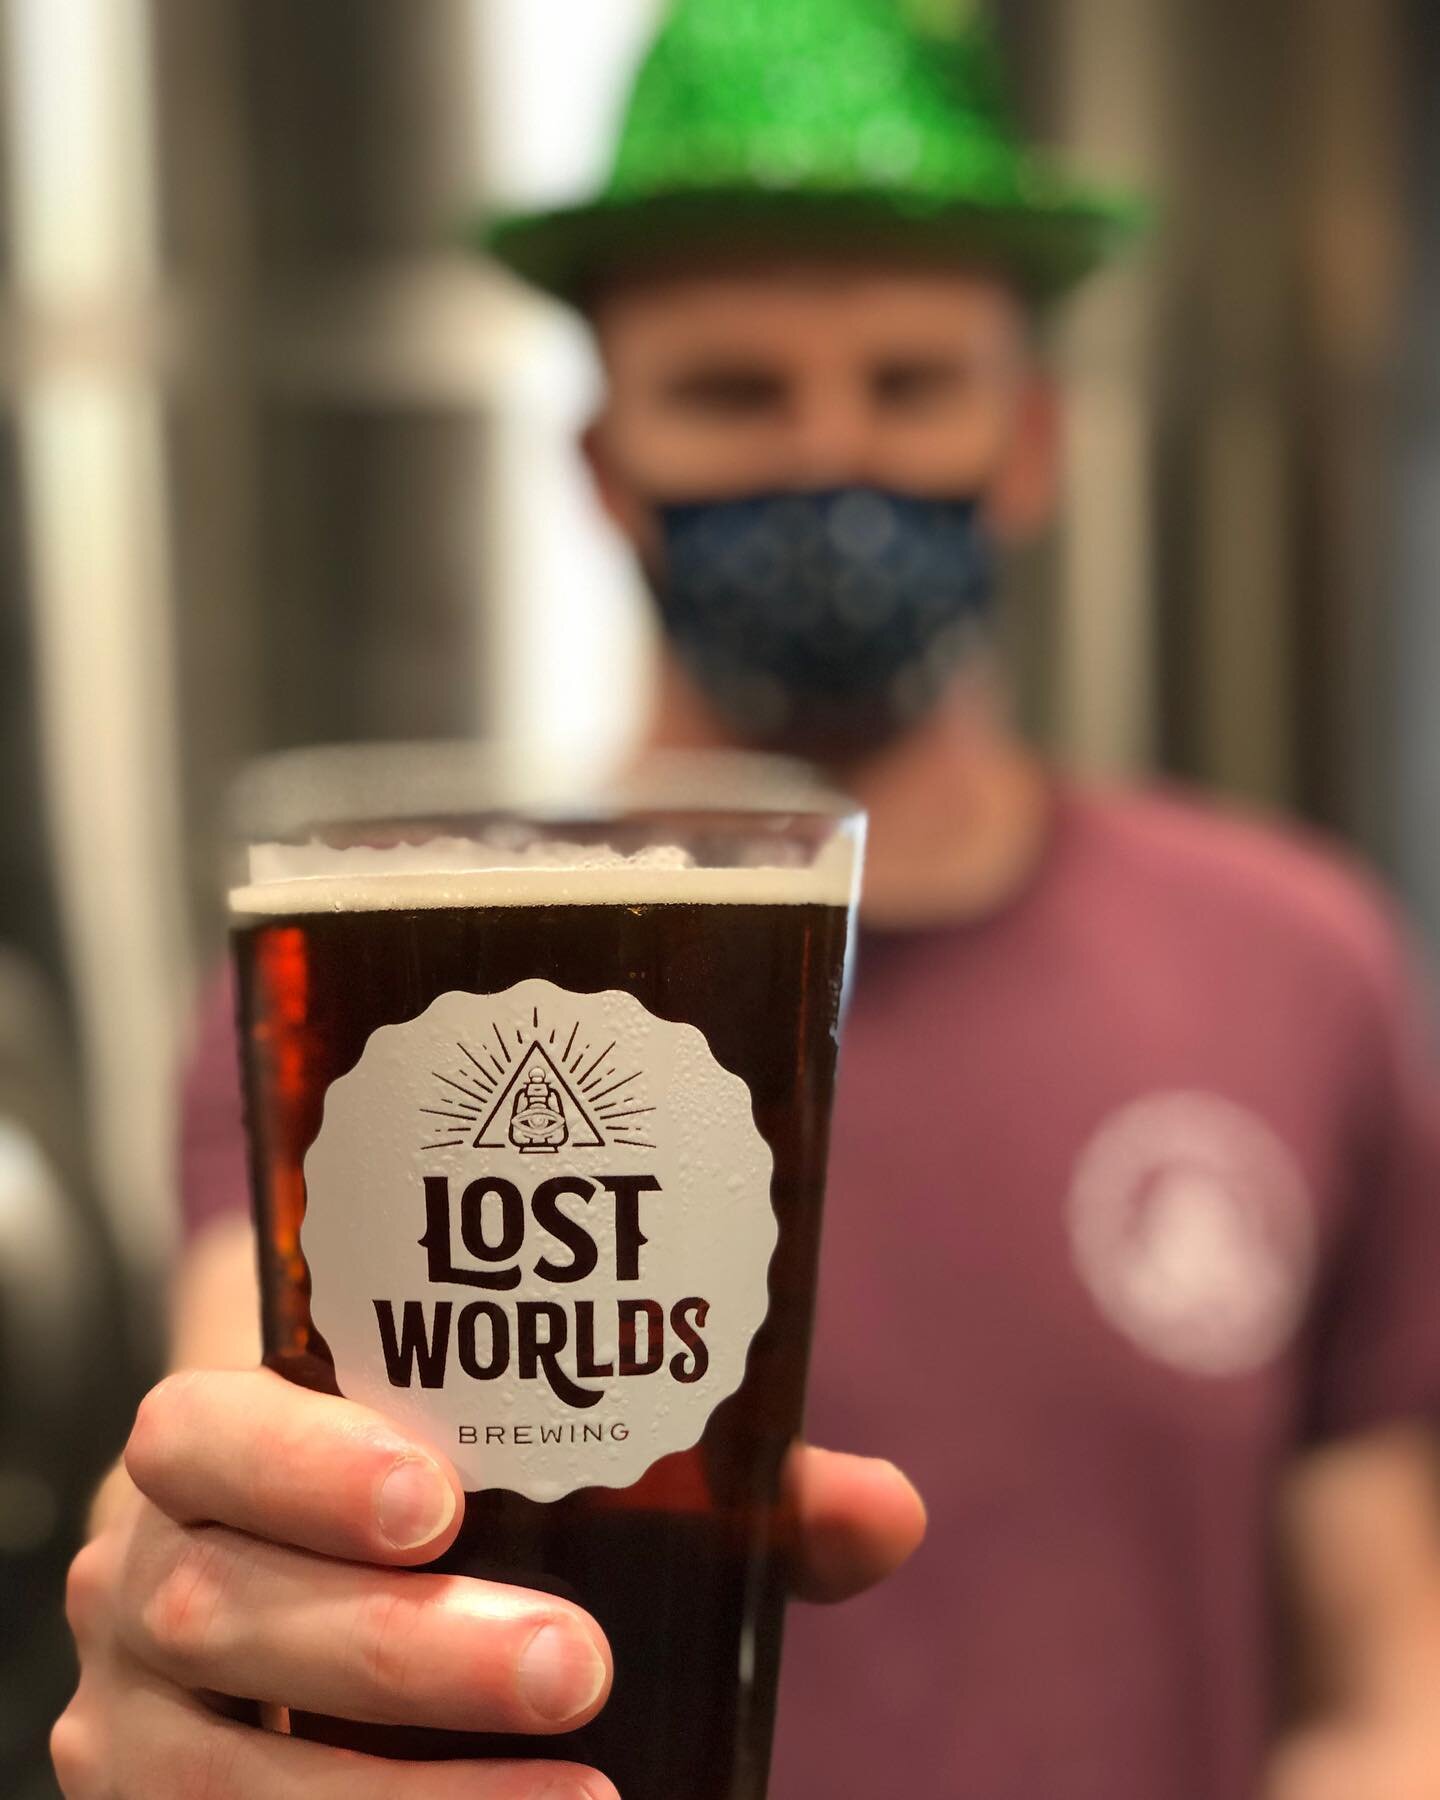 ☘️☘️☘️☘️Tapping today! Ardmore Irish Ale is the perfect pint to celebrate St. Paddy&rsquo;s Day. Check out a short video about this brew and the story behind the beer in our profile link. Cheers! #irishale #stpatricksday  #lostworldsbeer